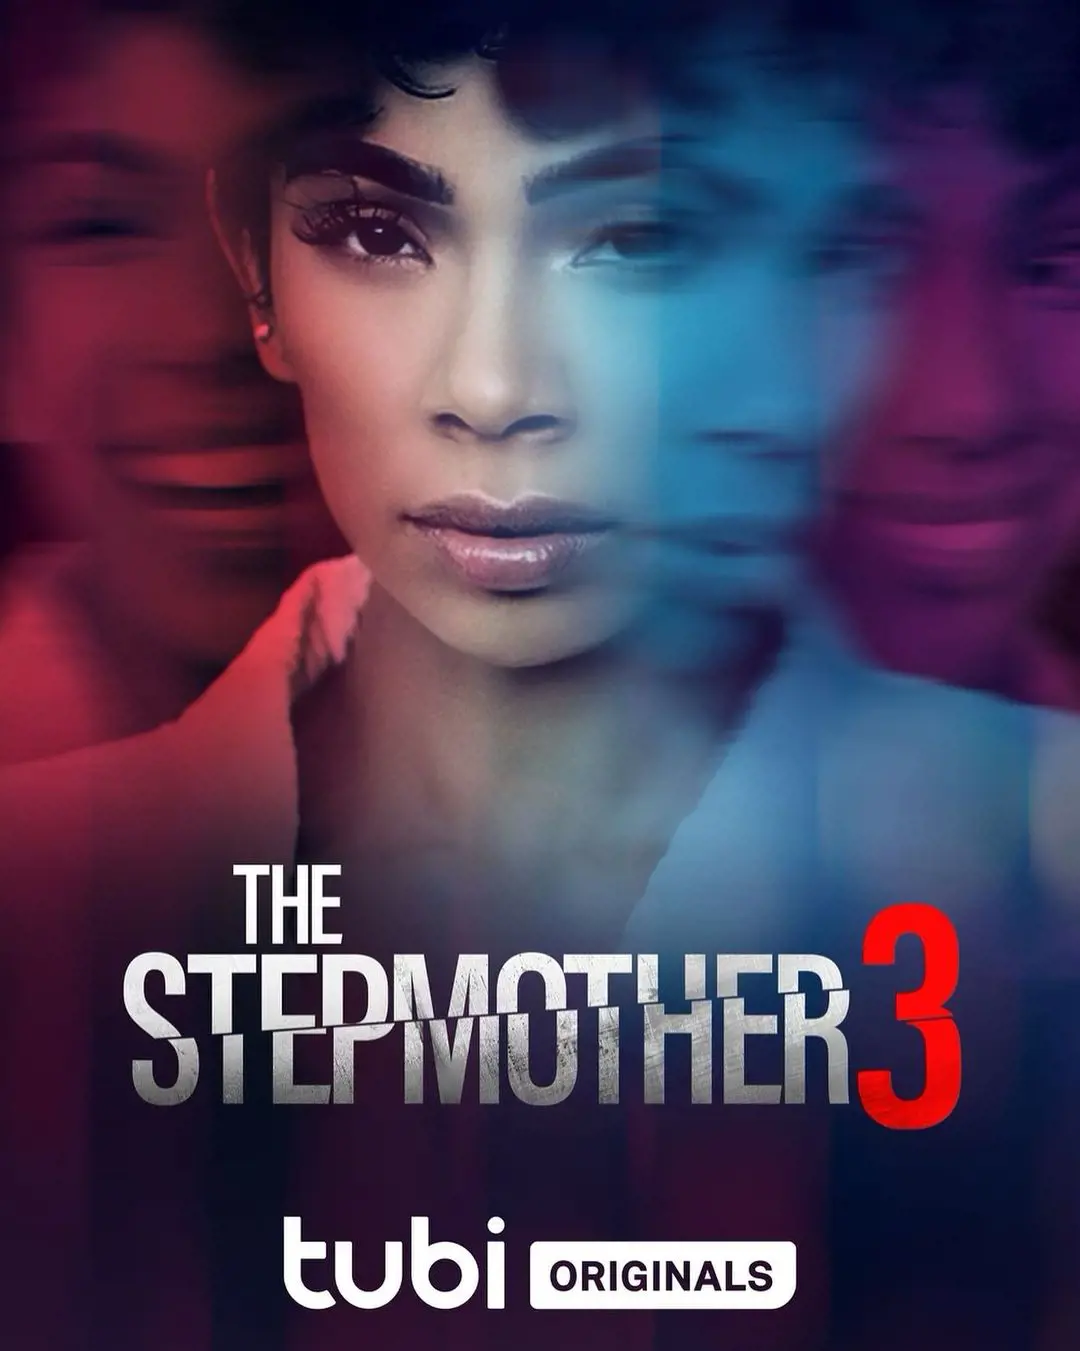 The Stepmother is a thriller suspense movie directed by Chris Stokes and co-written by Marques Houston